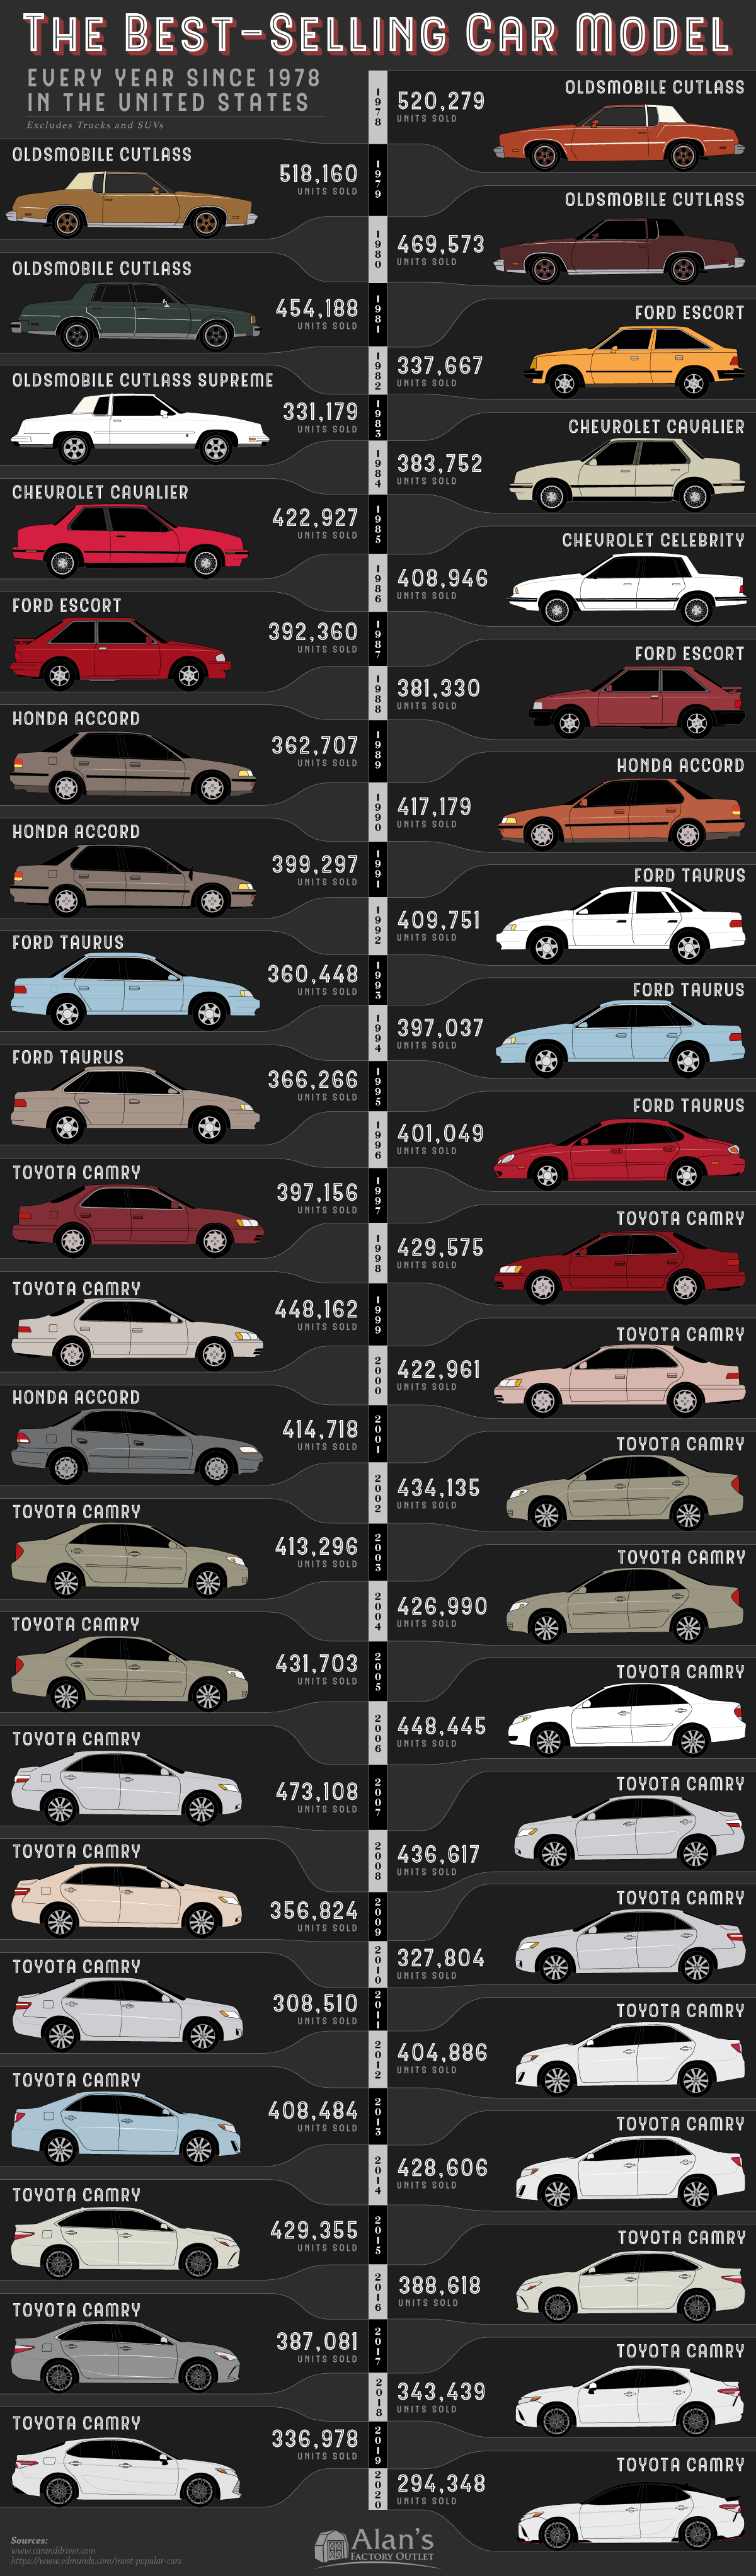 The world's best-selling cars